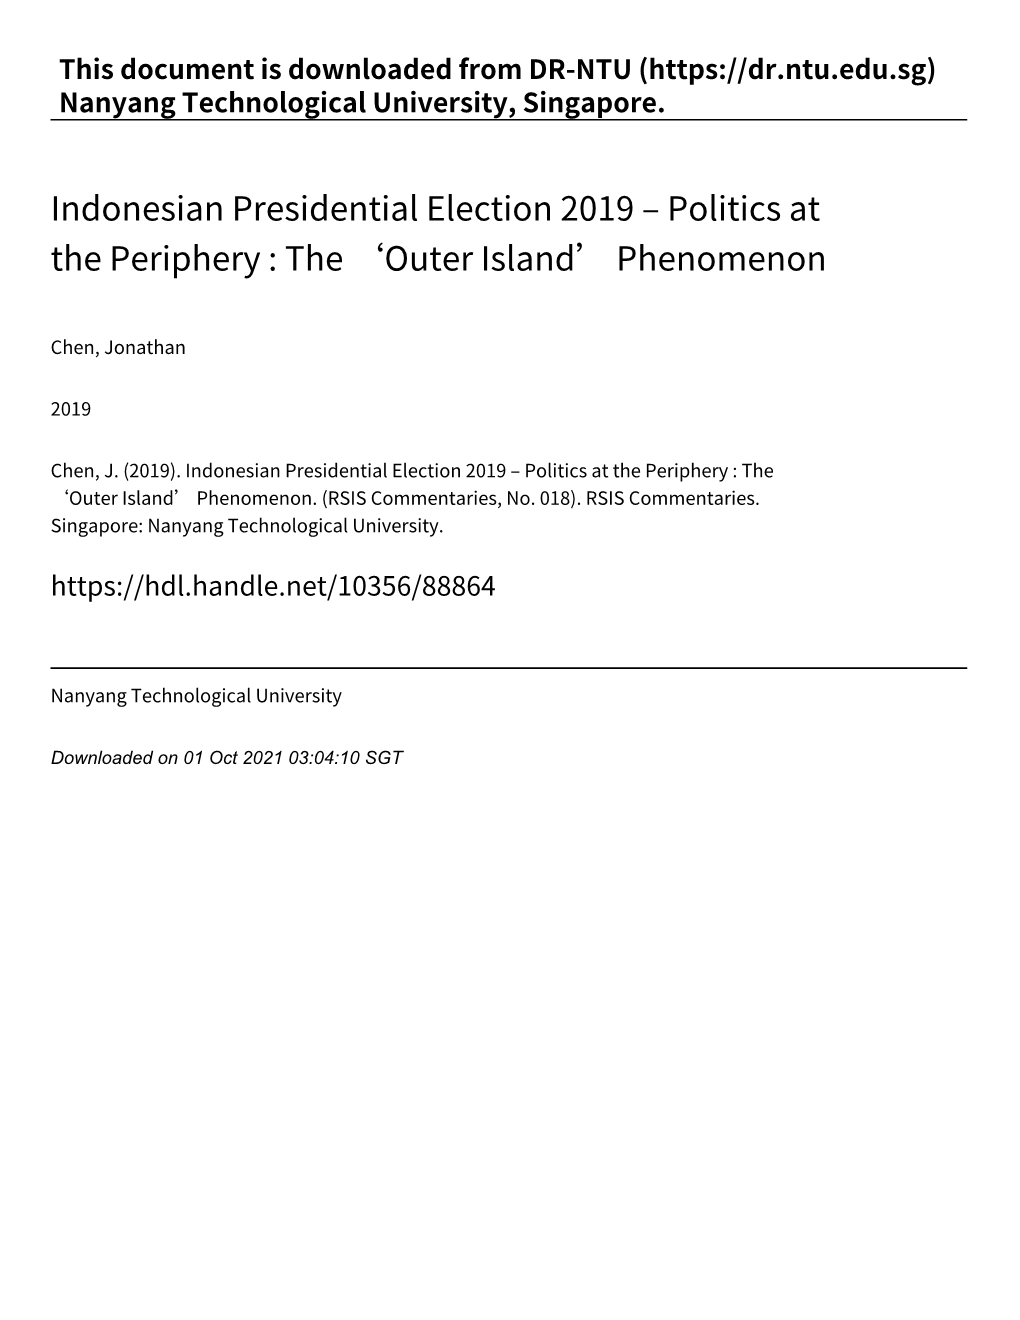 Indonesian Presidential Election 2019 – Politics at the Periphery : the ‘Outer Island’ Phenomenon